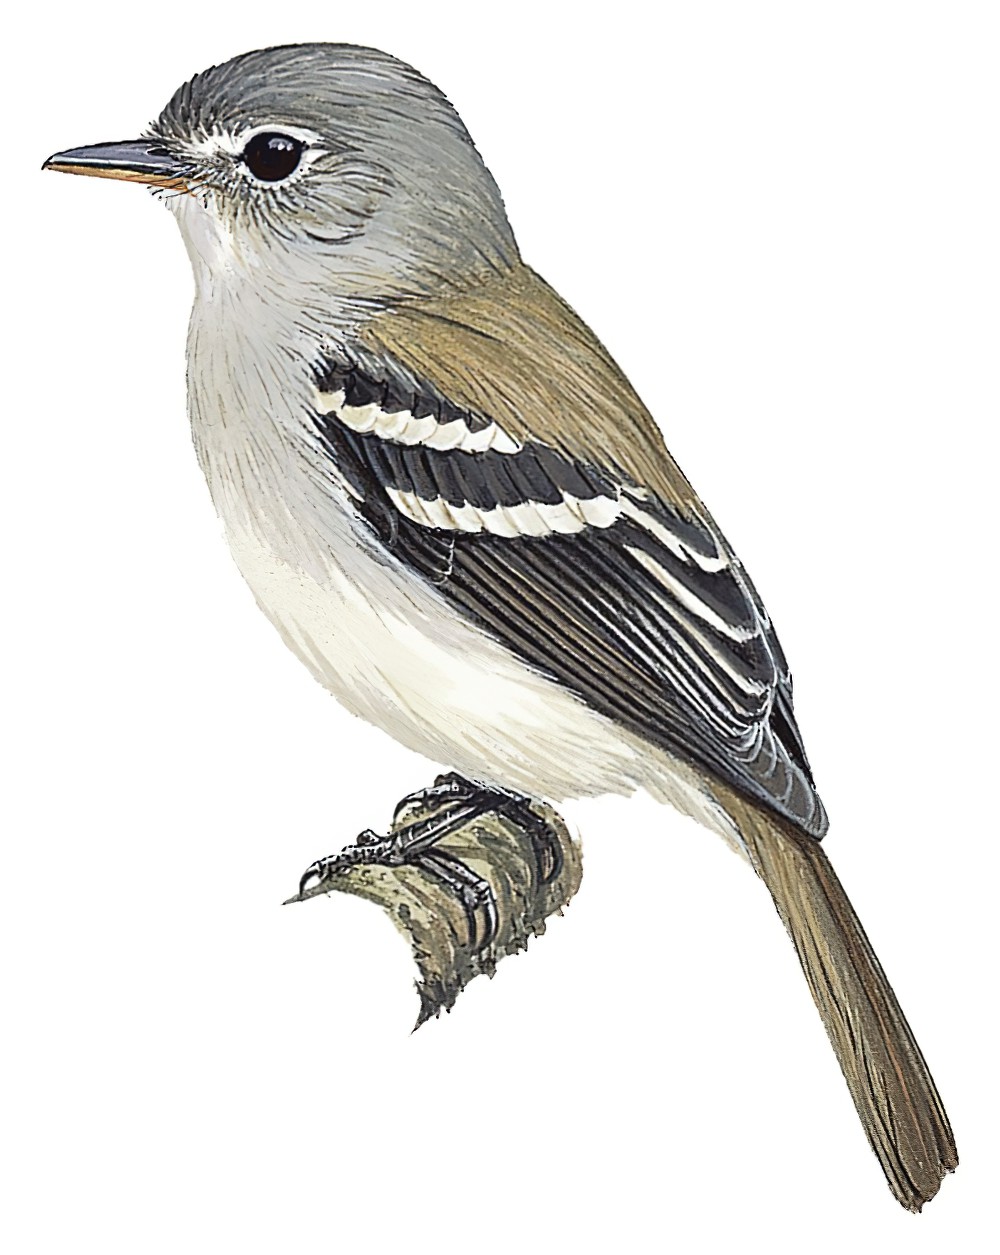 Gray-breasted Flycatcher / Lathrotriccus griseipectus